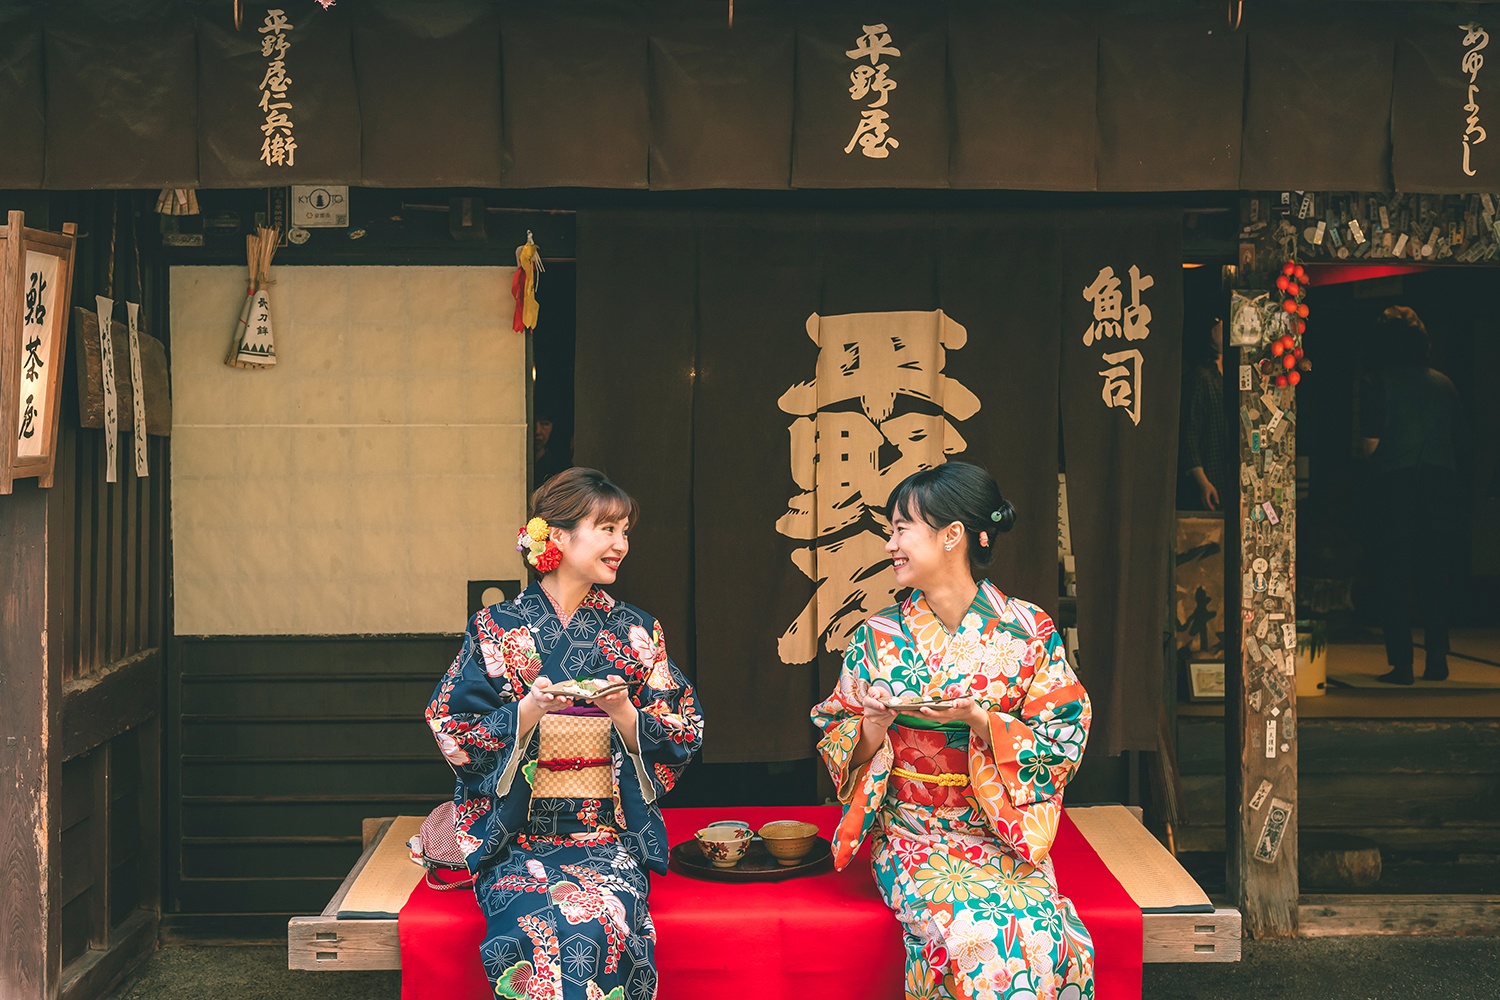 Guide to 33 Types of Traditional Japanese Instruments - For online shopping  of Japanese culture items, go to Taiko Center Online Shop